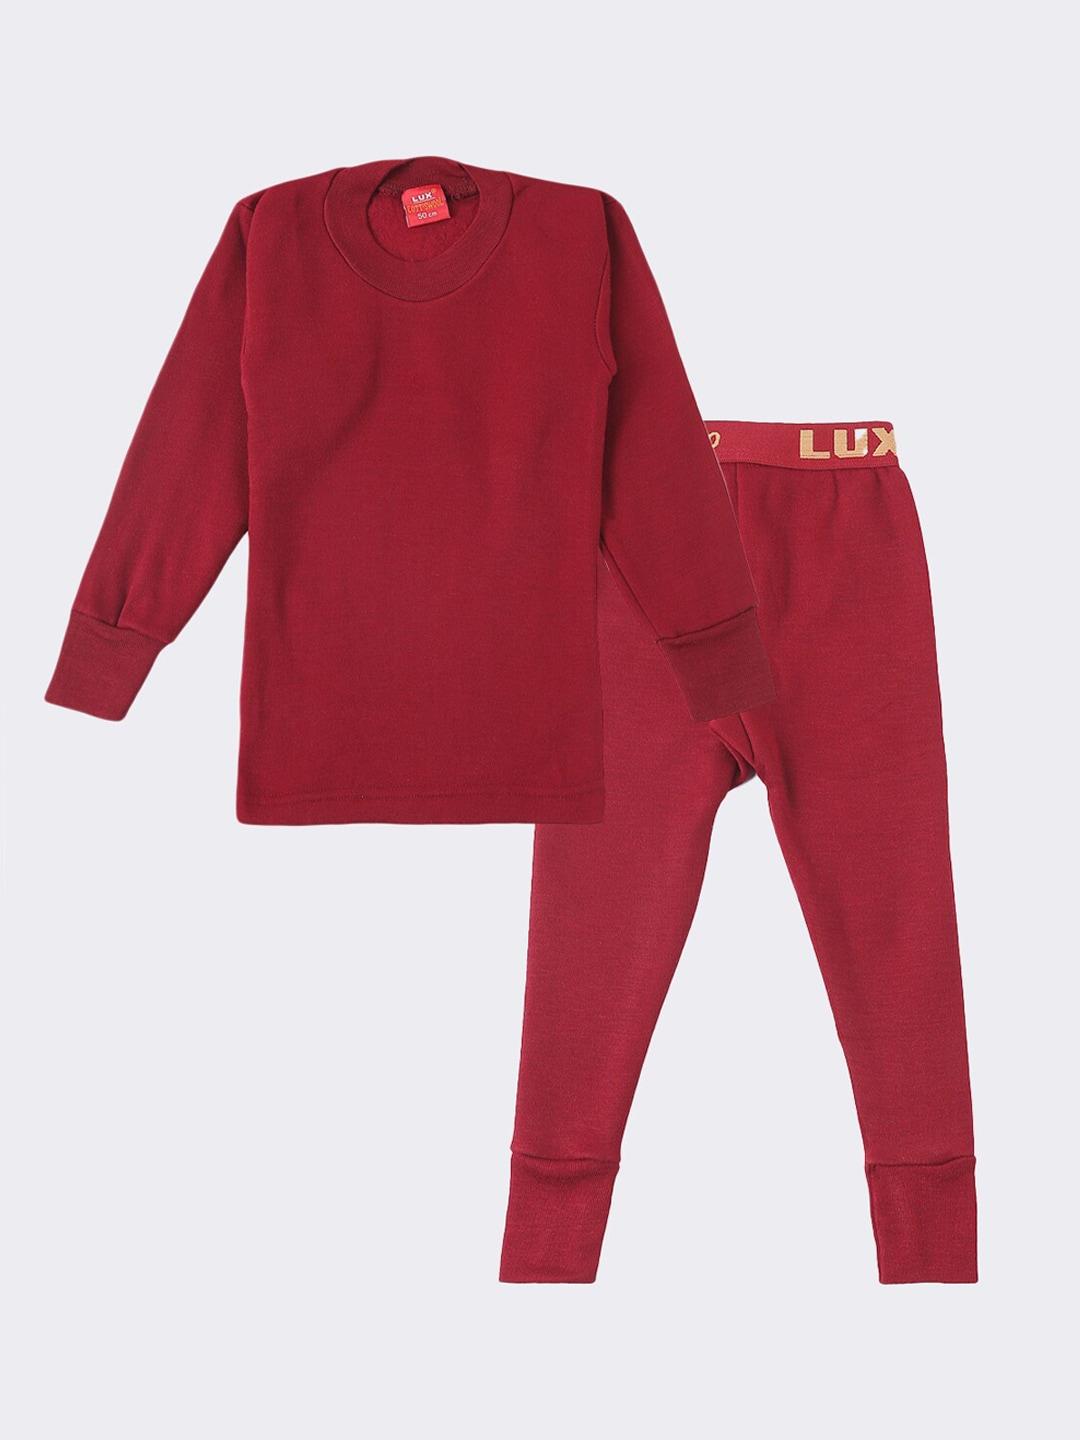 Lux Cottswool Boys Maroon Solid Cotton Thermal Set